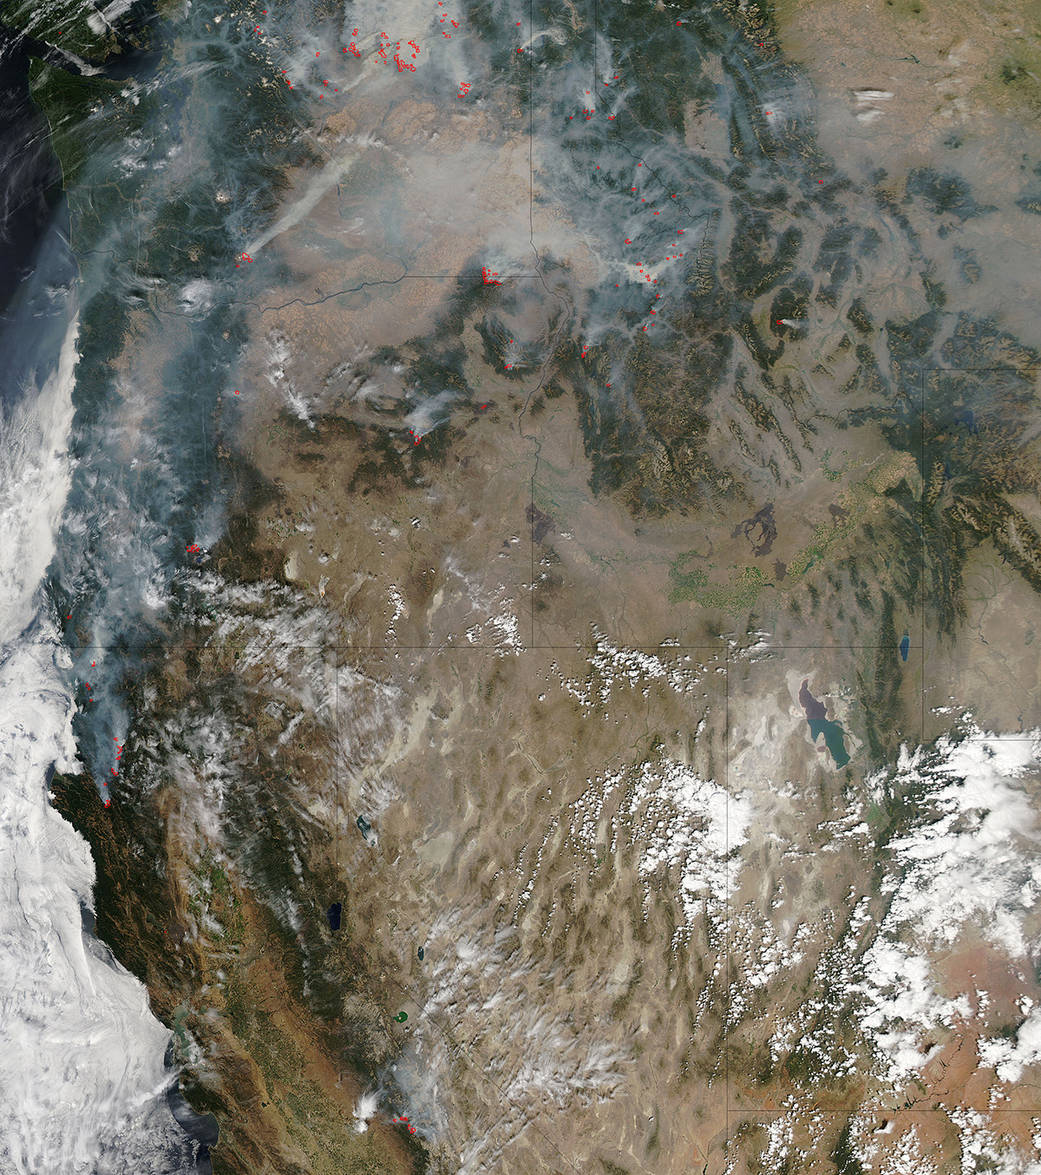 Western Wildfires from August 2015